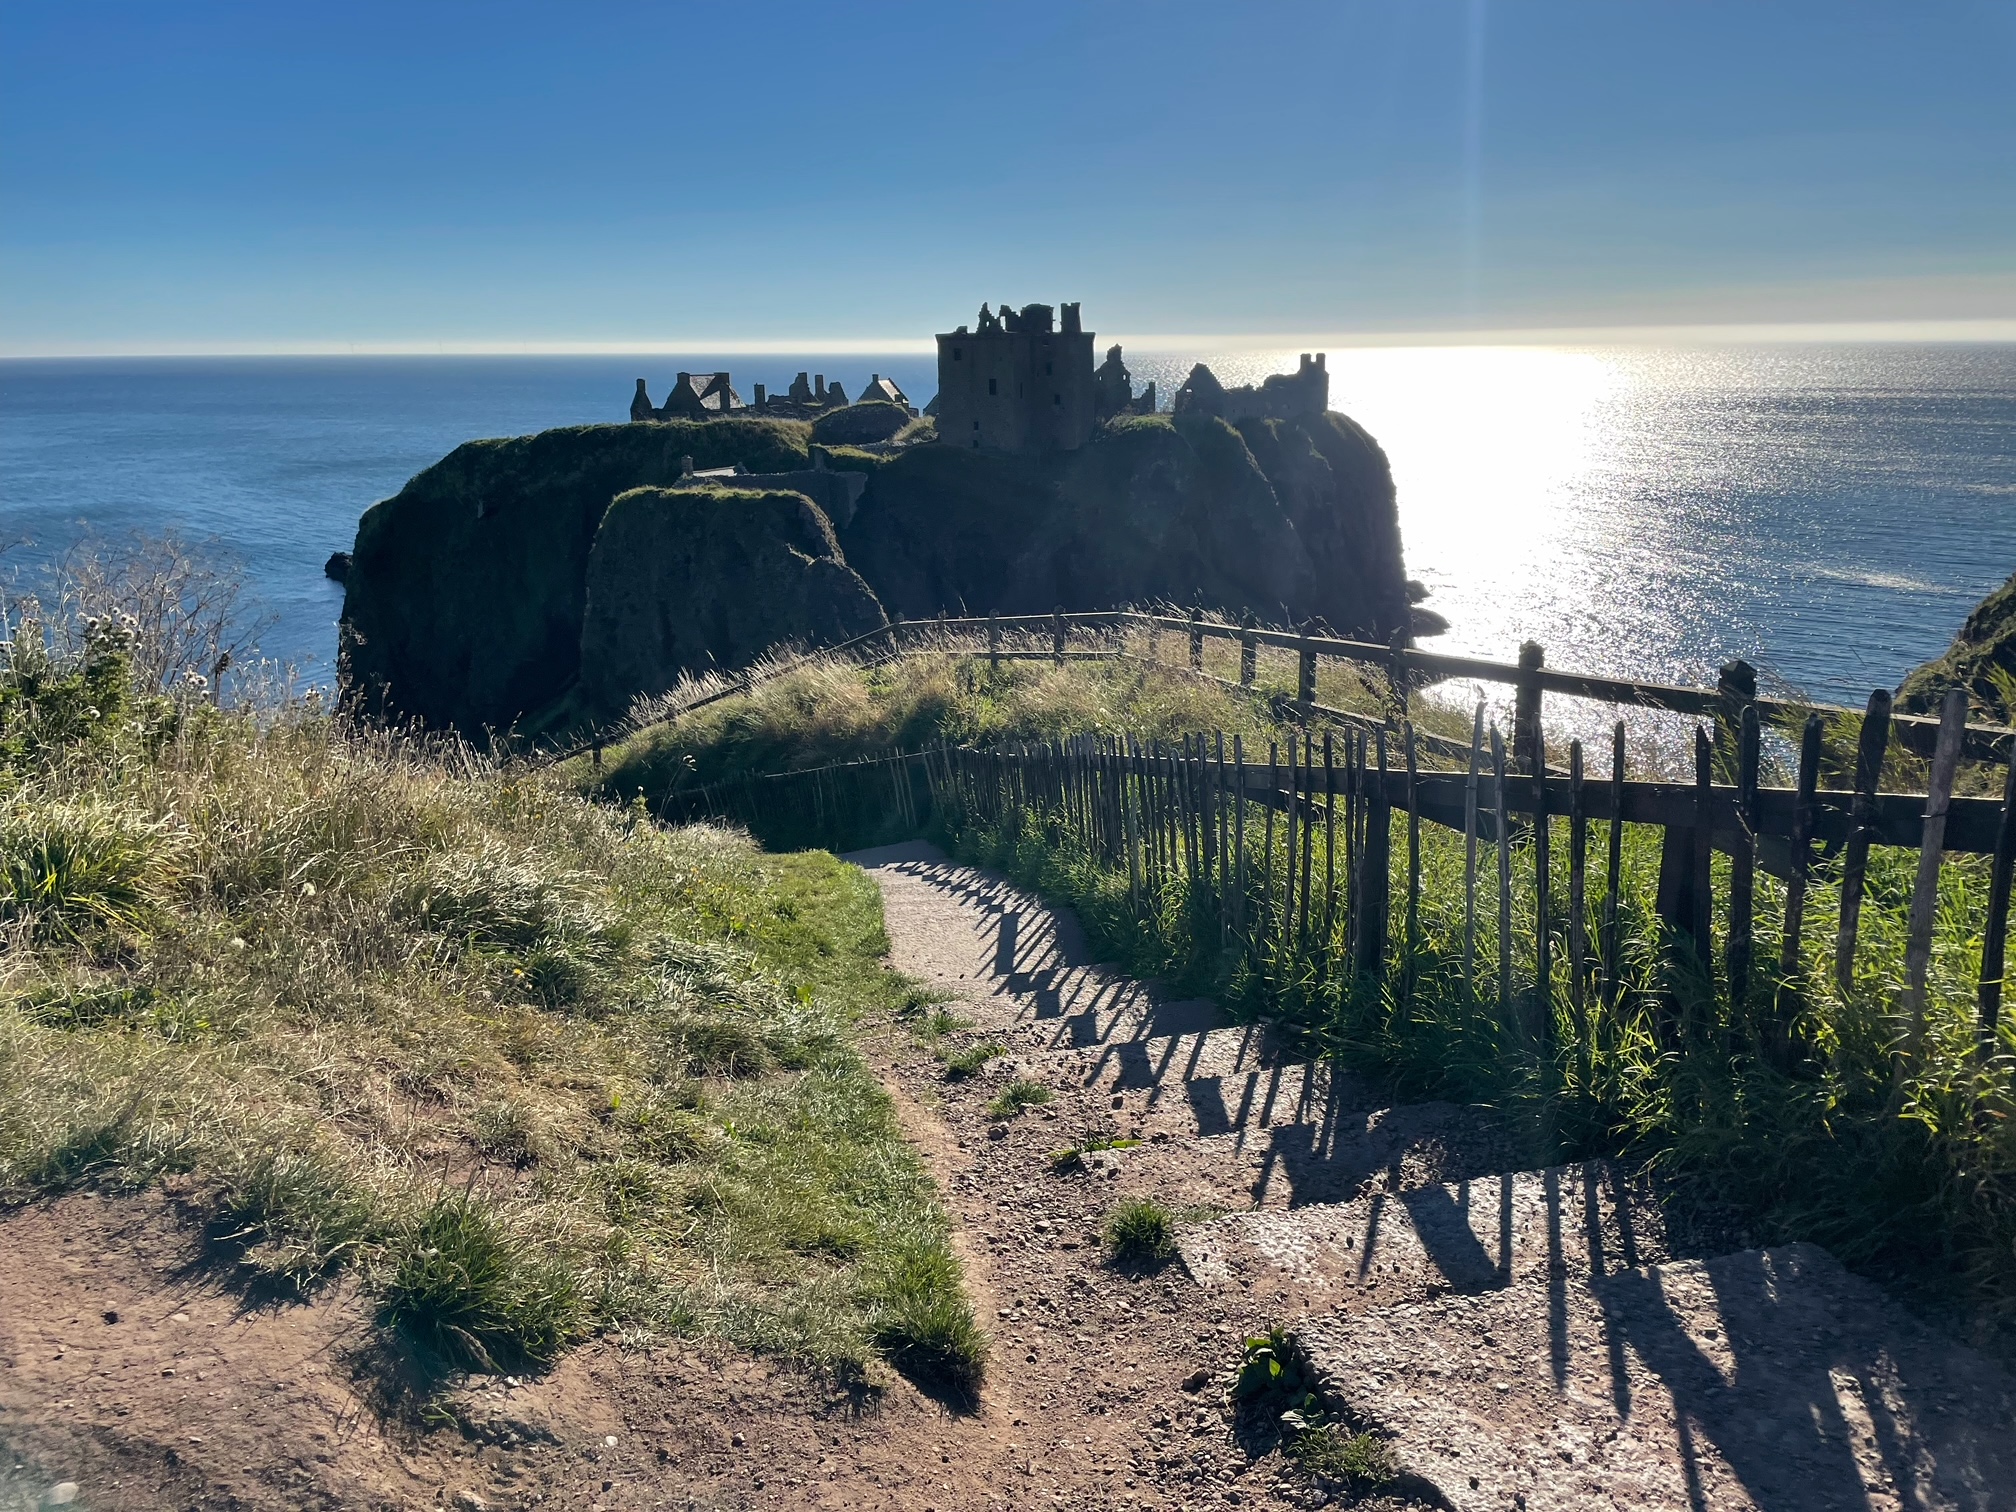 Dunnottar Castle, is a medieval fortress, perched atop a cliff overlooking the North Sea. Although it's now a ruin, it's location makes it highly photogenic.